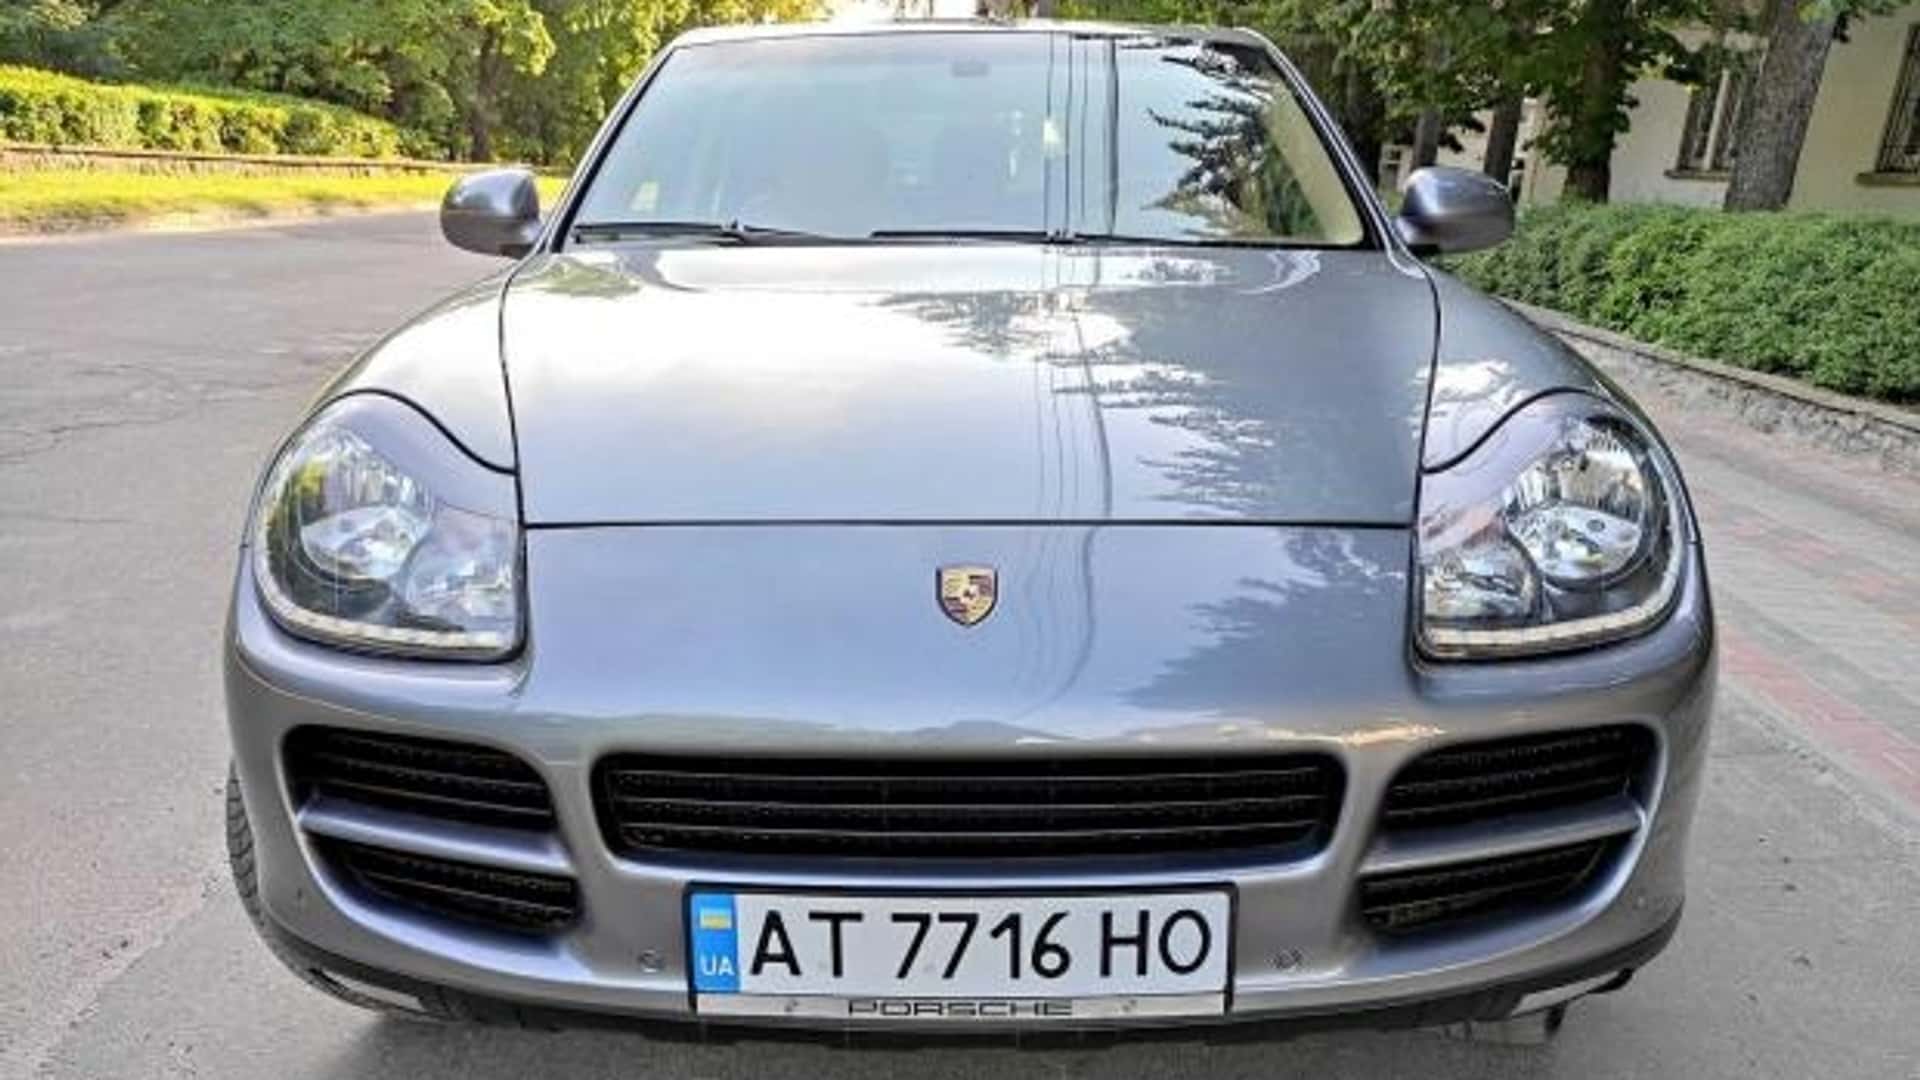 Porsche Cayenne Turbo for sale? Check our list beforehand!